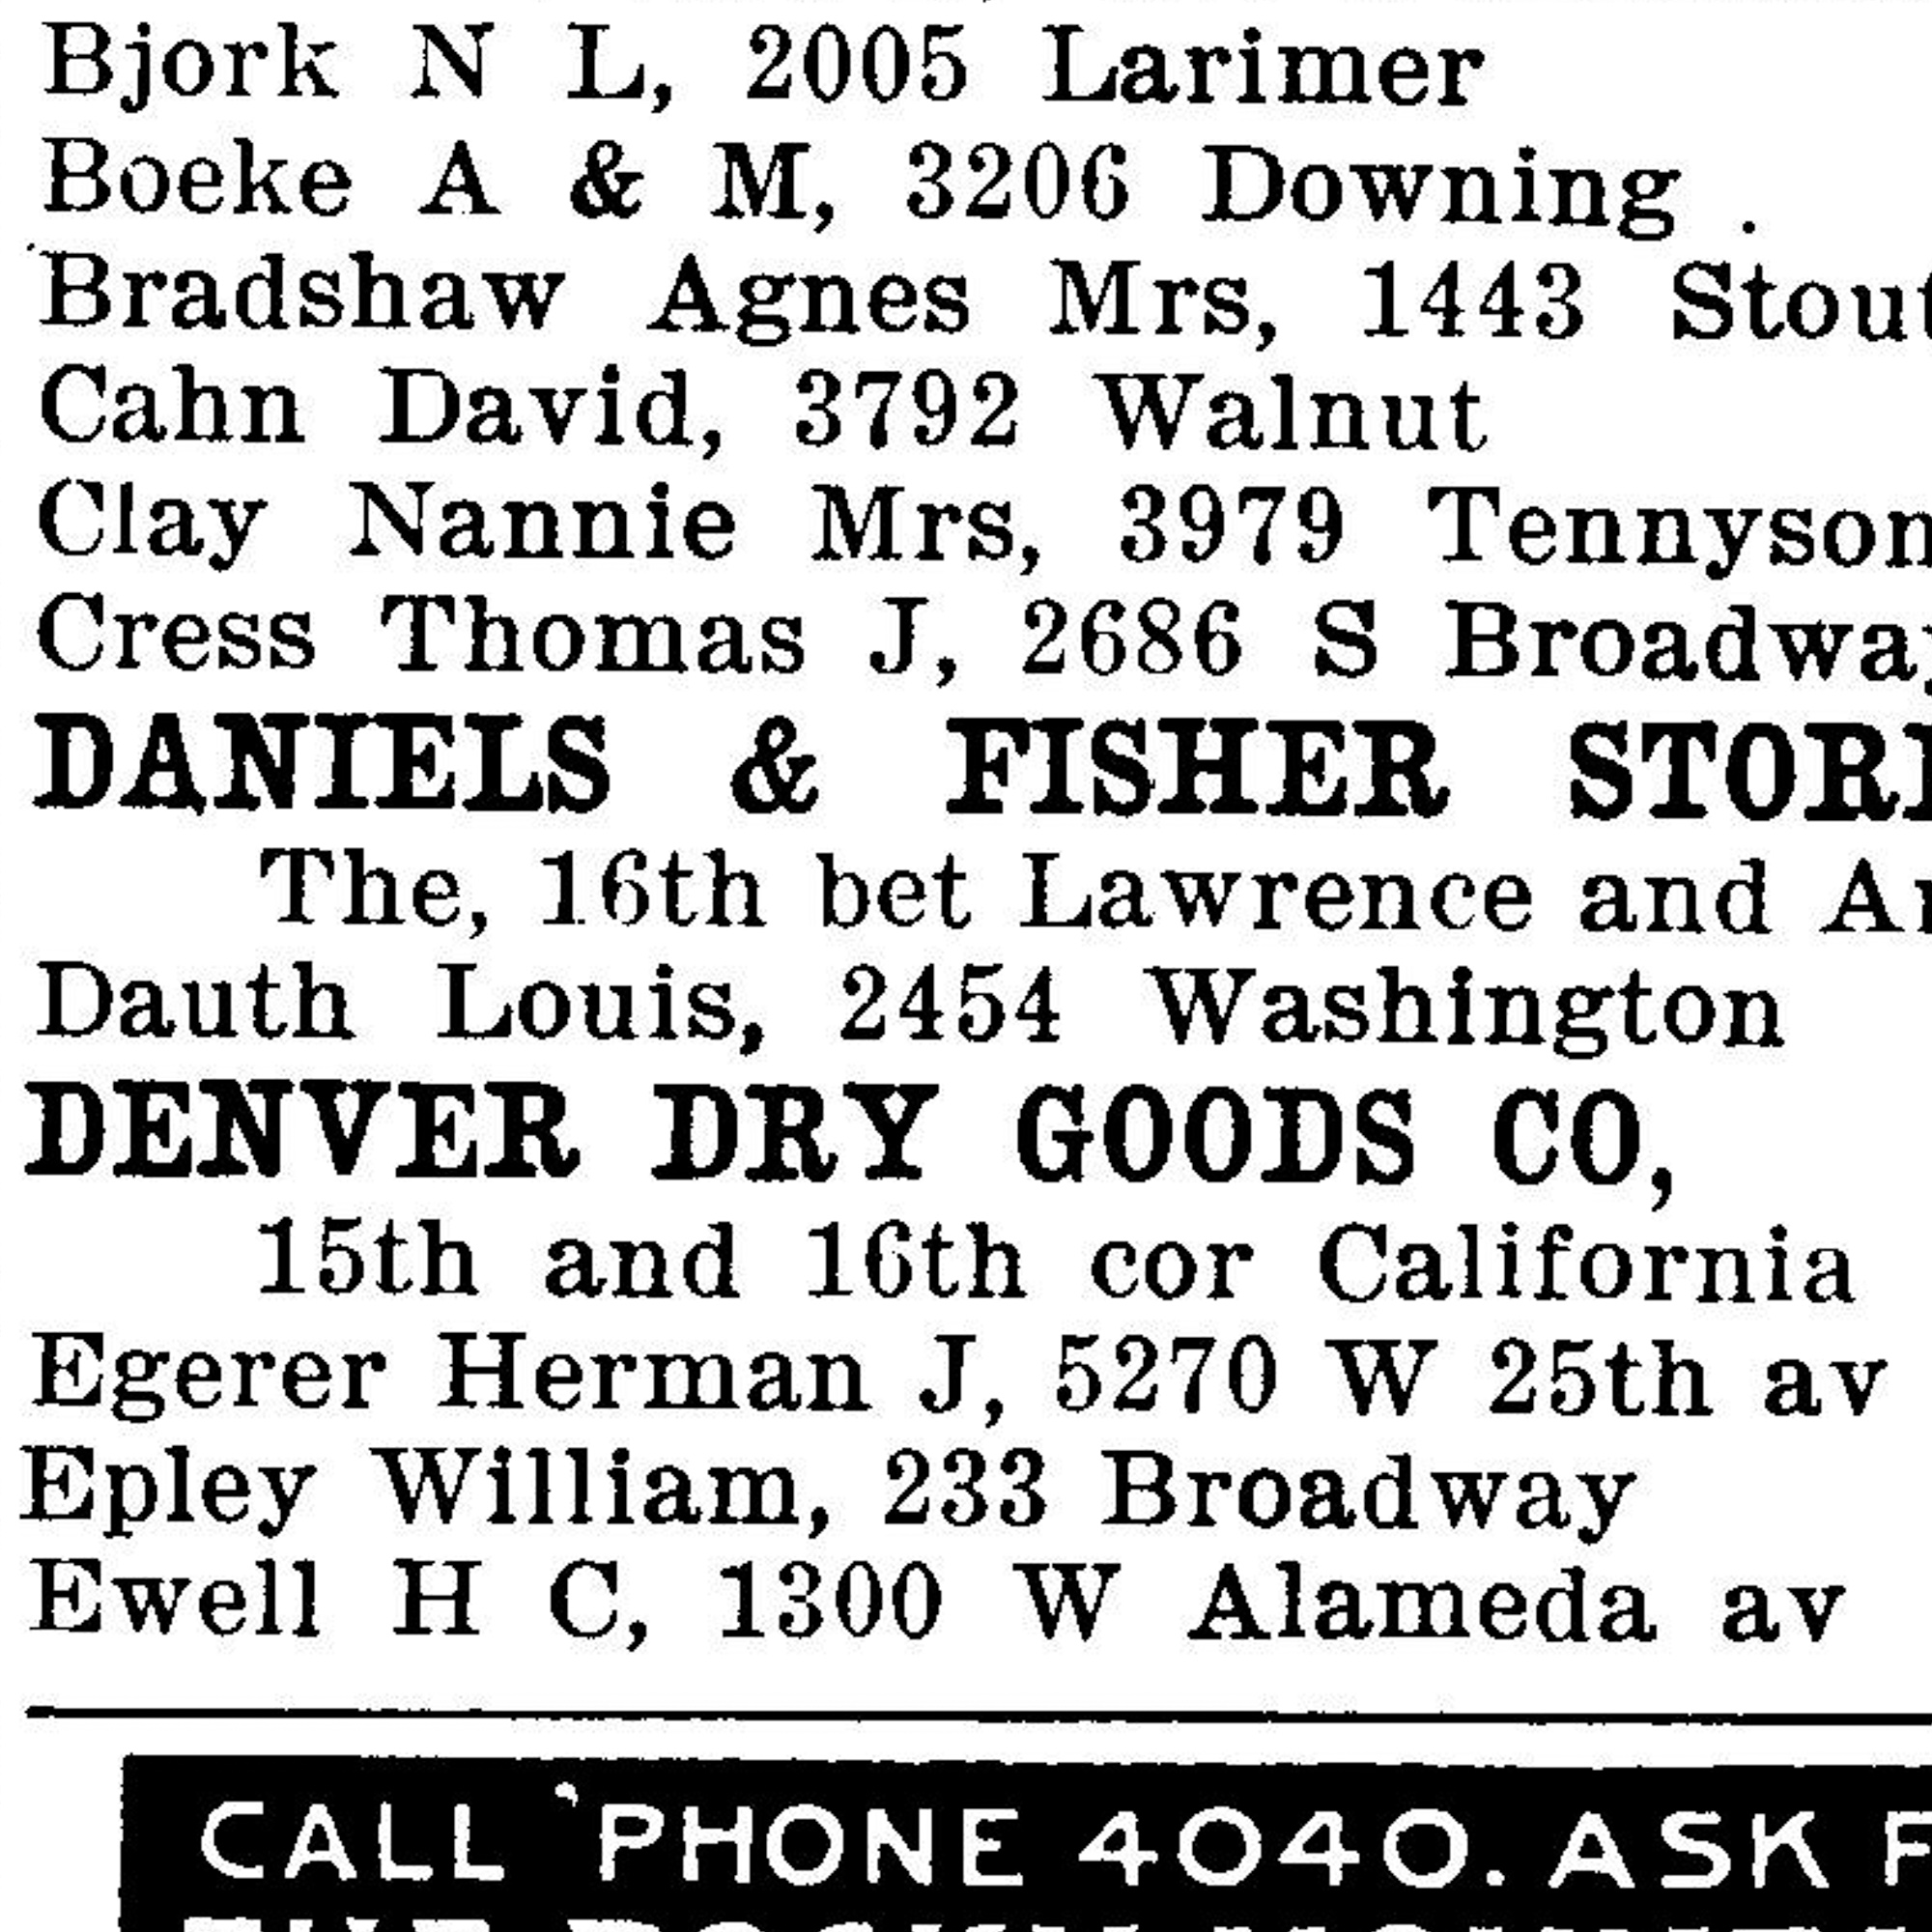 Dauth Family Archive - 1915 - Denver Directory - Entry For Louis Dauth